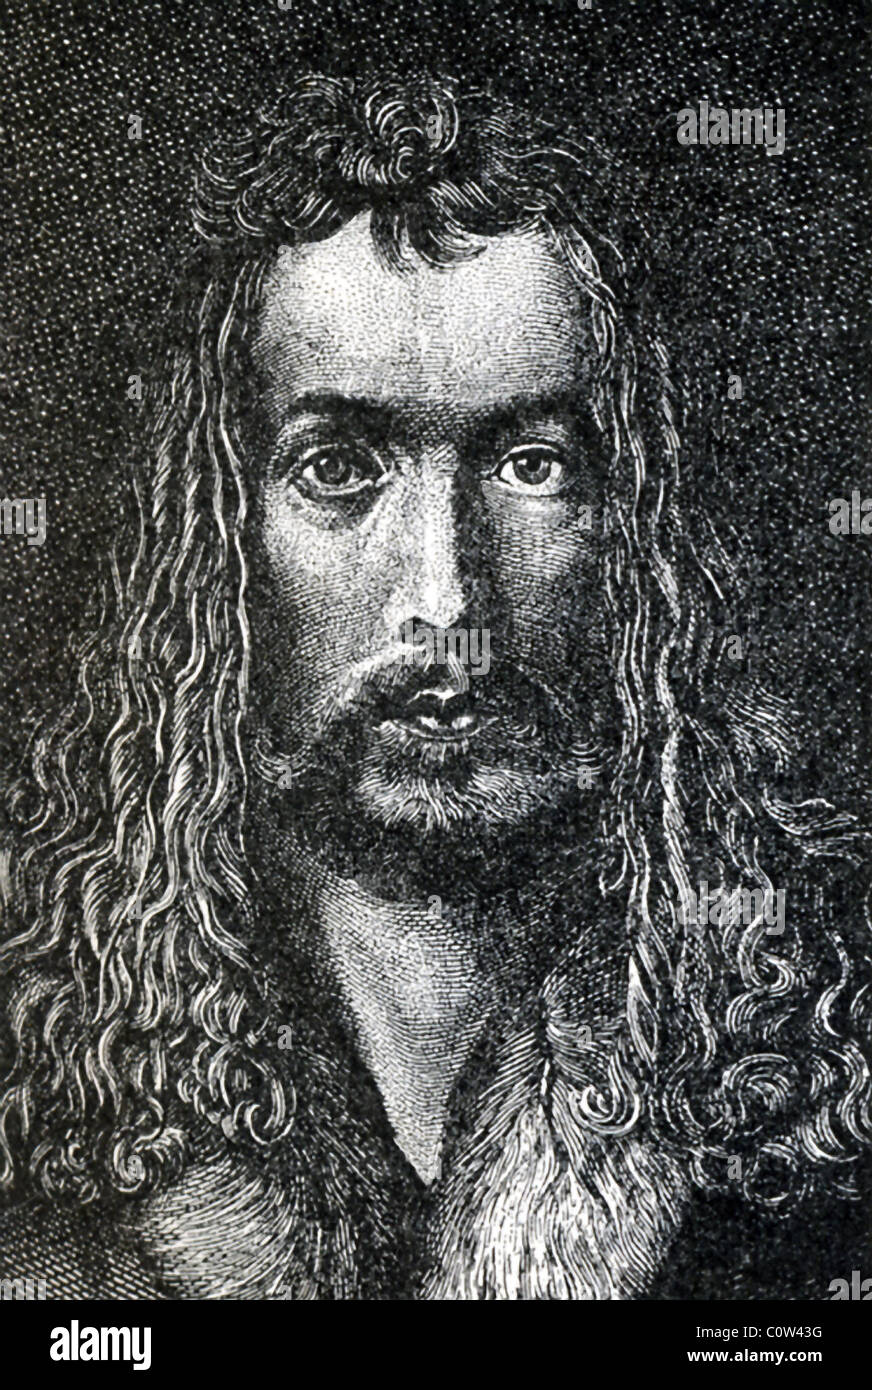 Albrecht Durer (1471-1528) was a German artist well known for his prints and drawings of keen observation and rich detail. Stock Photo